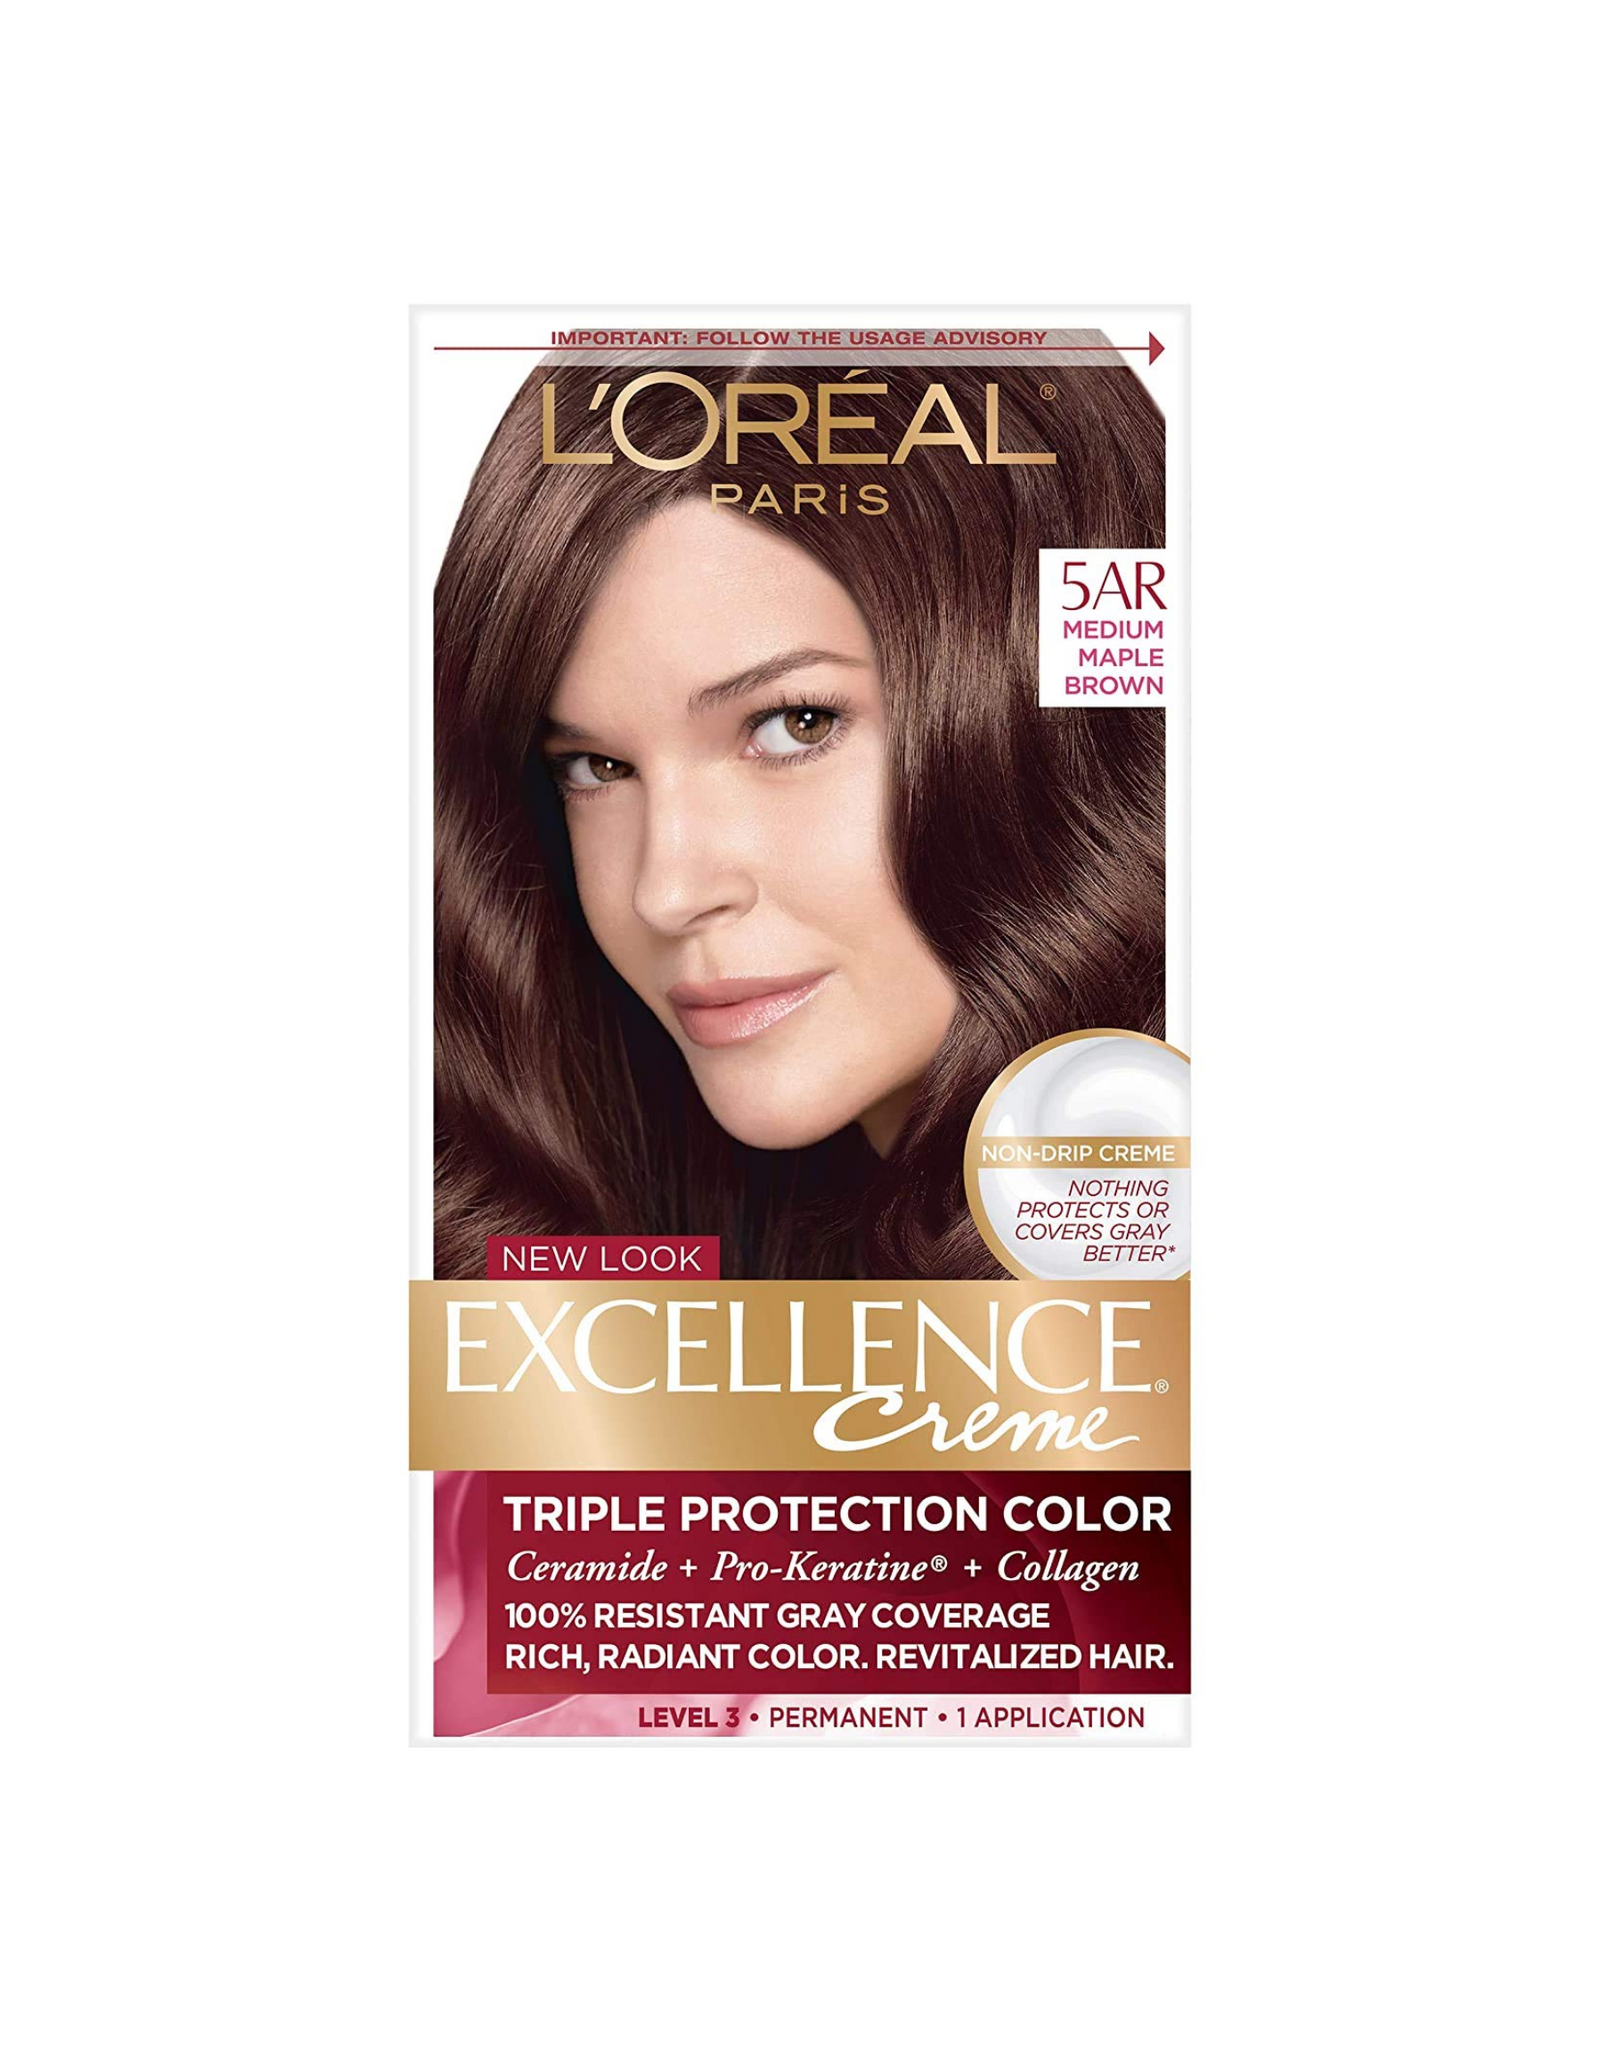 L'Oreal Paris Excellence Creme with Triple Protection Color, 5AR Medium Maple Brown, 1 Ct (Pack of 1)